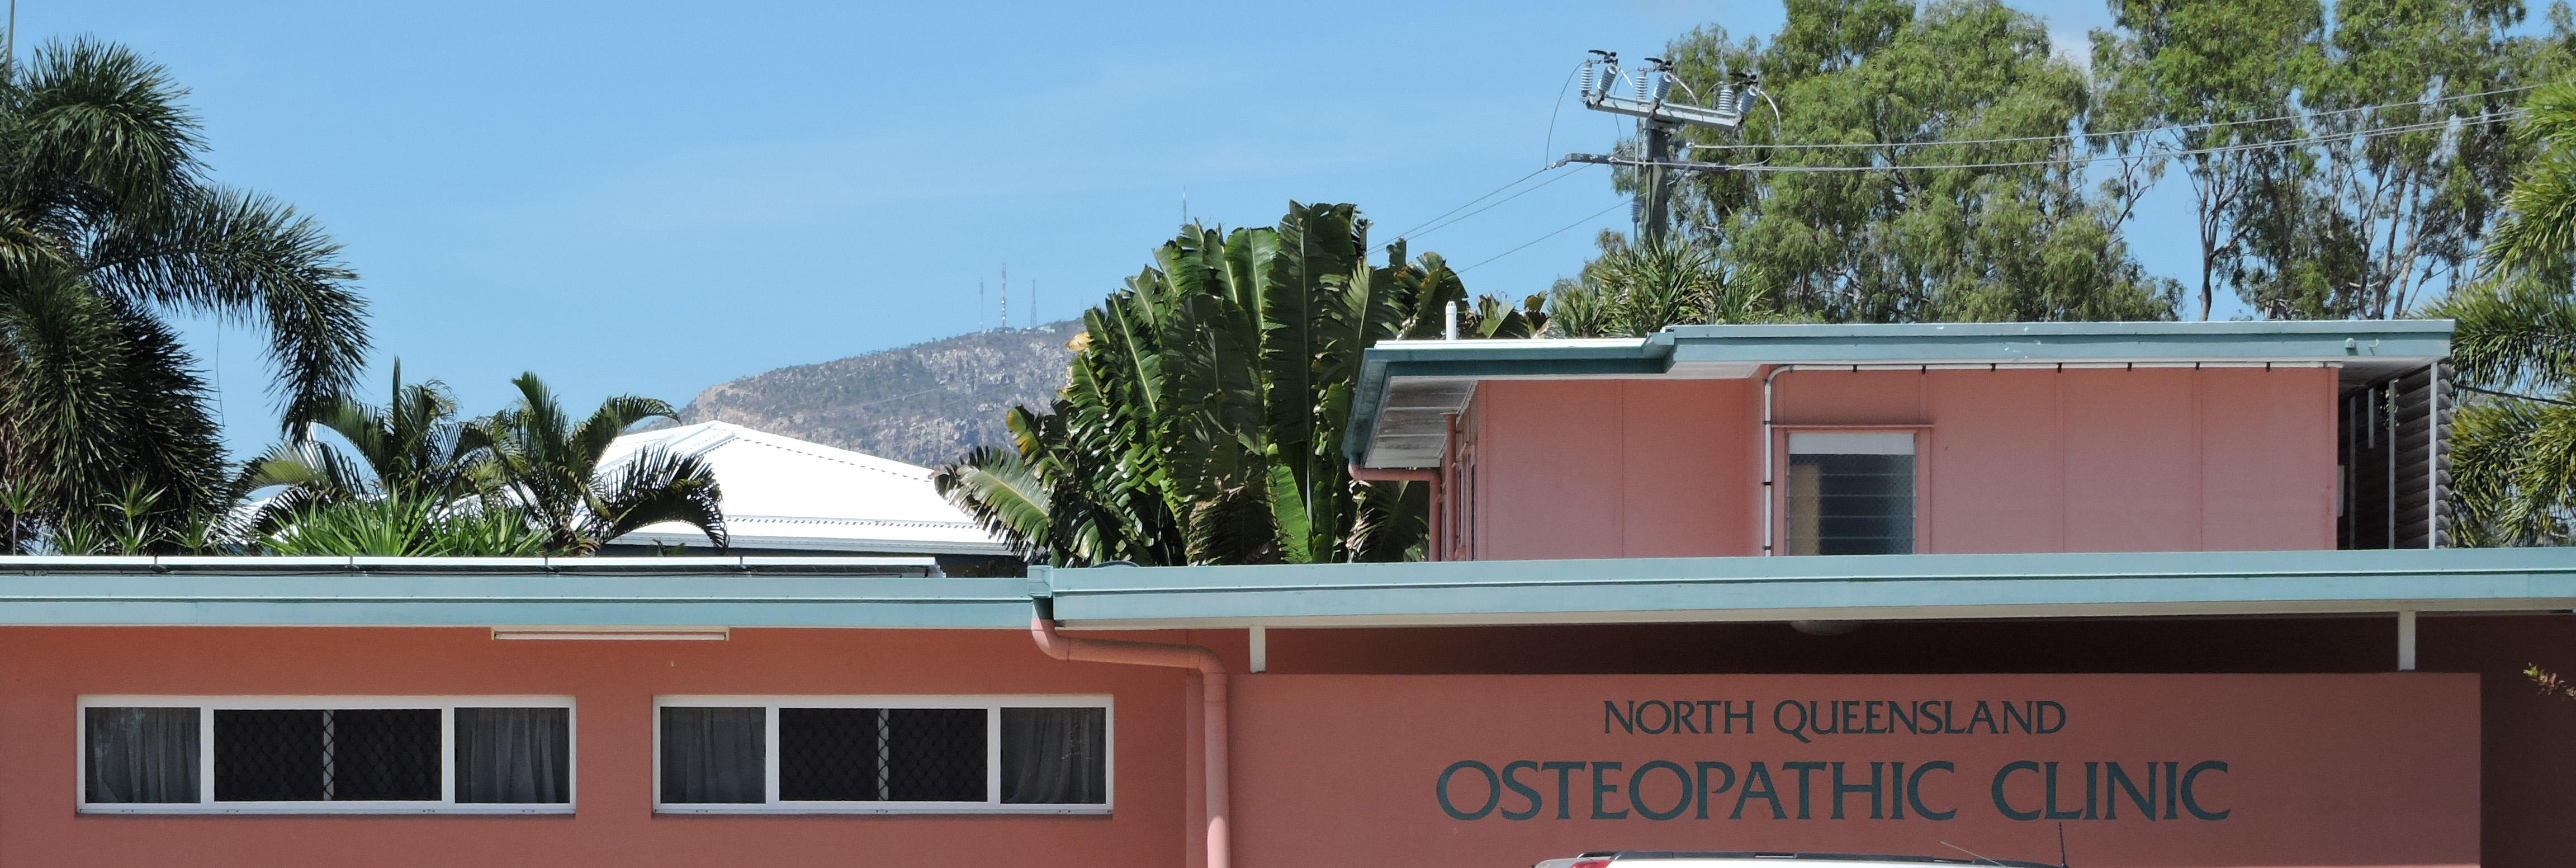 Images North Queensland Osteopathic Clinic